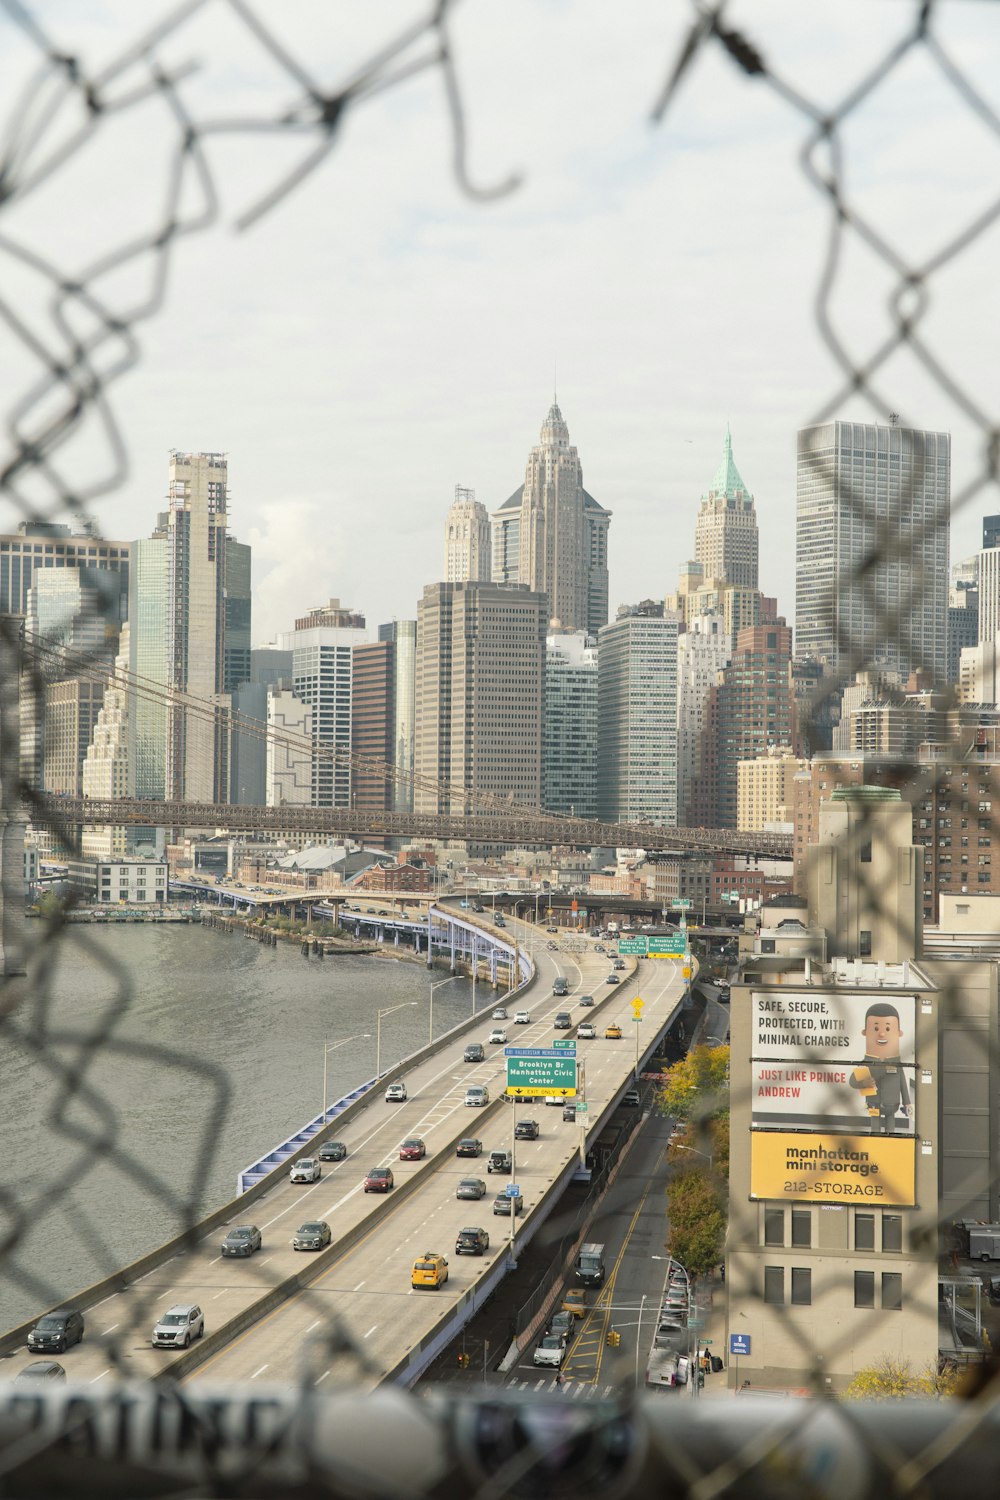 a view of a city from behind a chain link fence